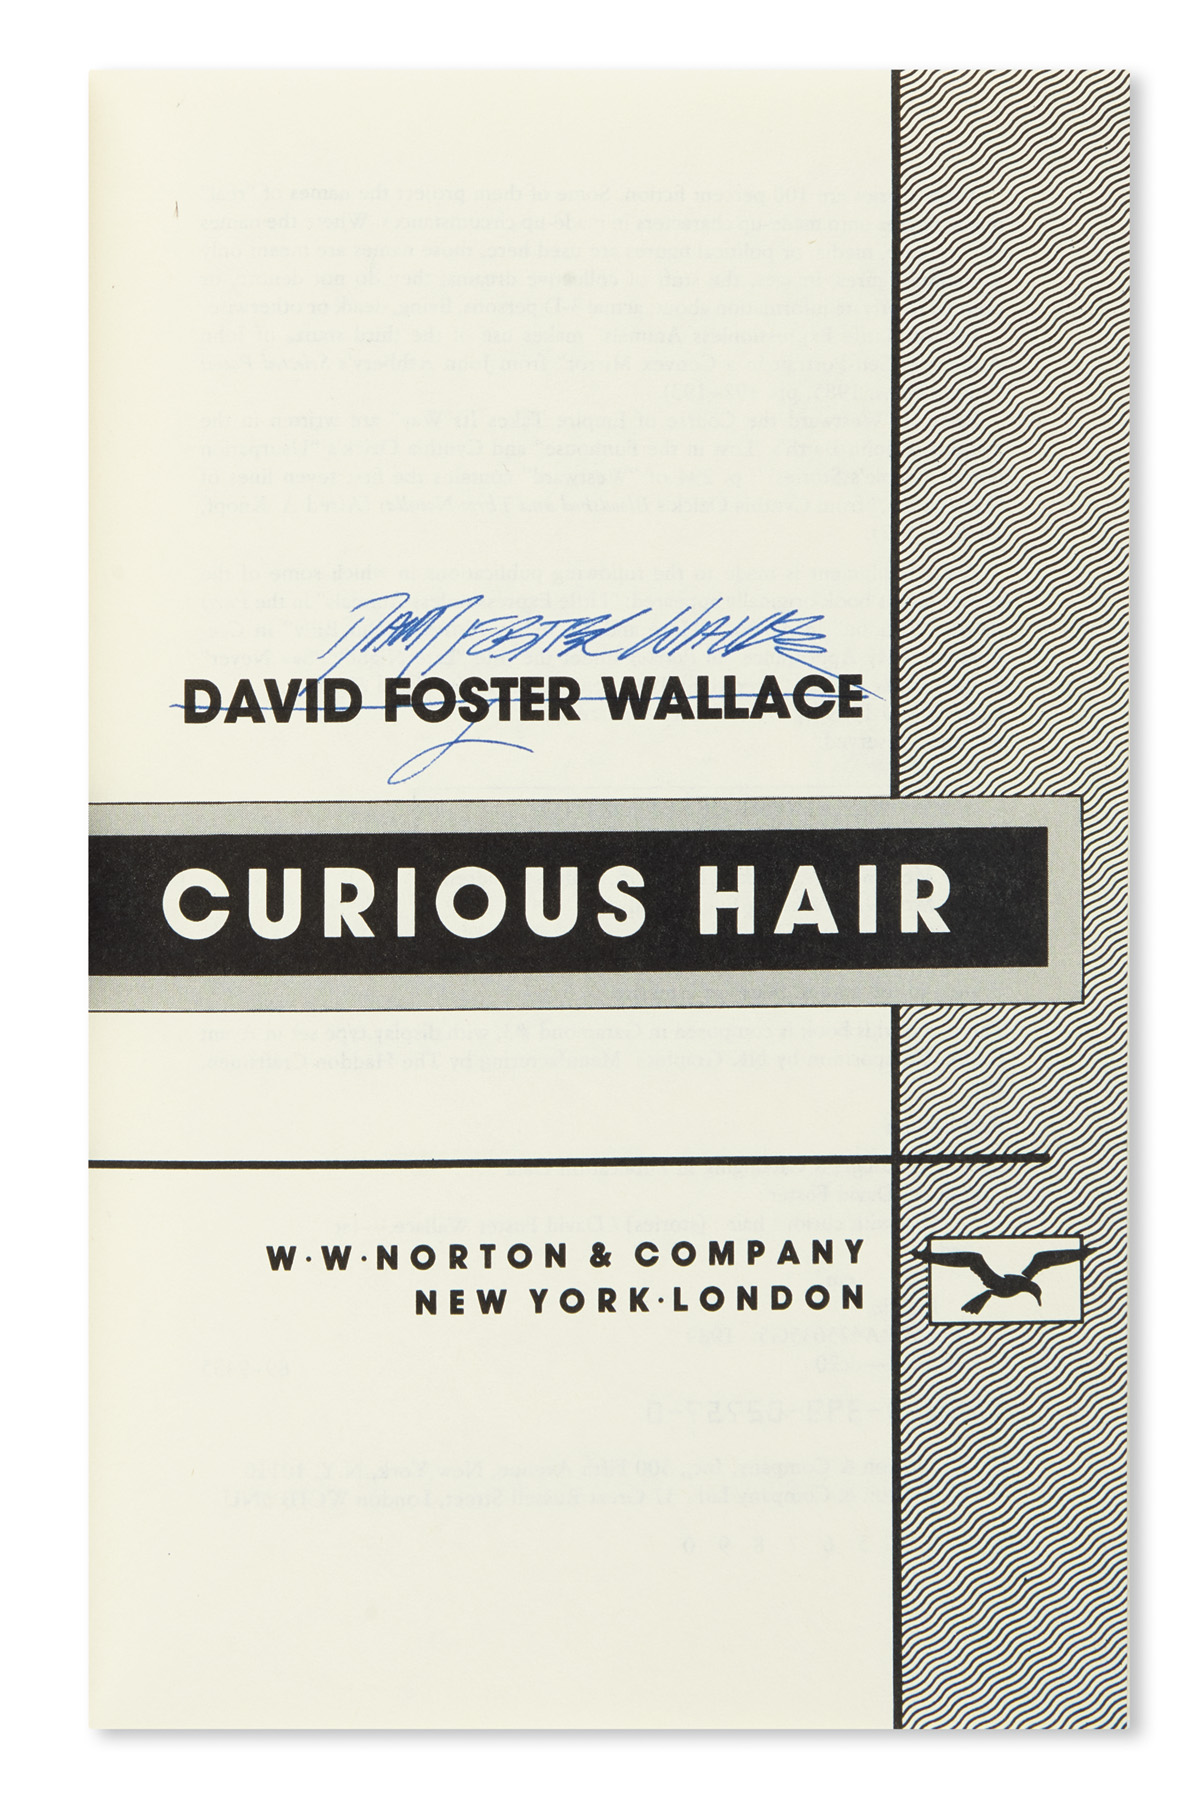 WALLACE, DAVID FOSTER. Girl With Curious Hair.